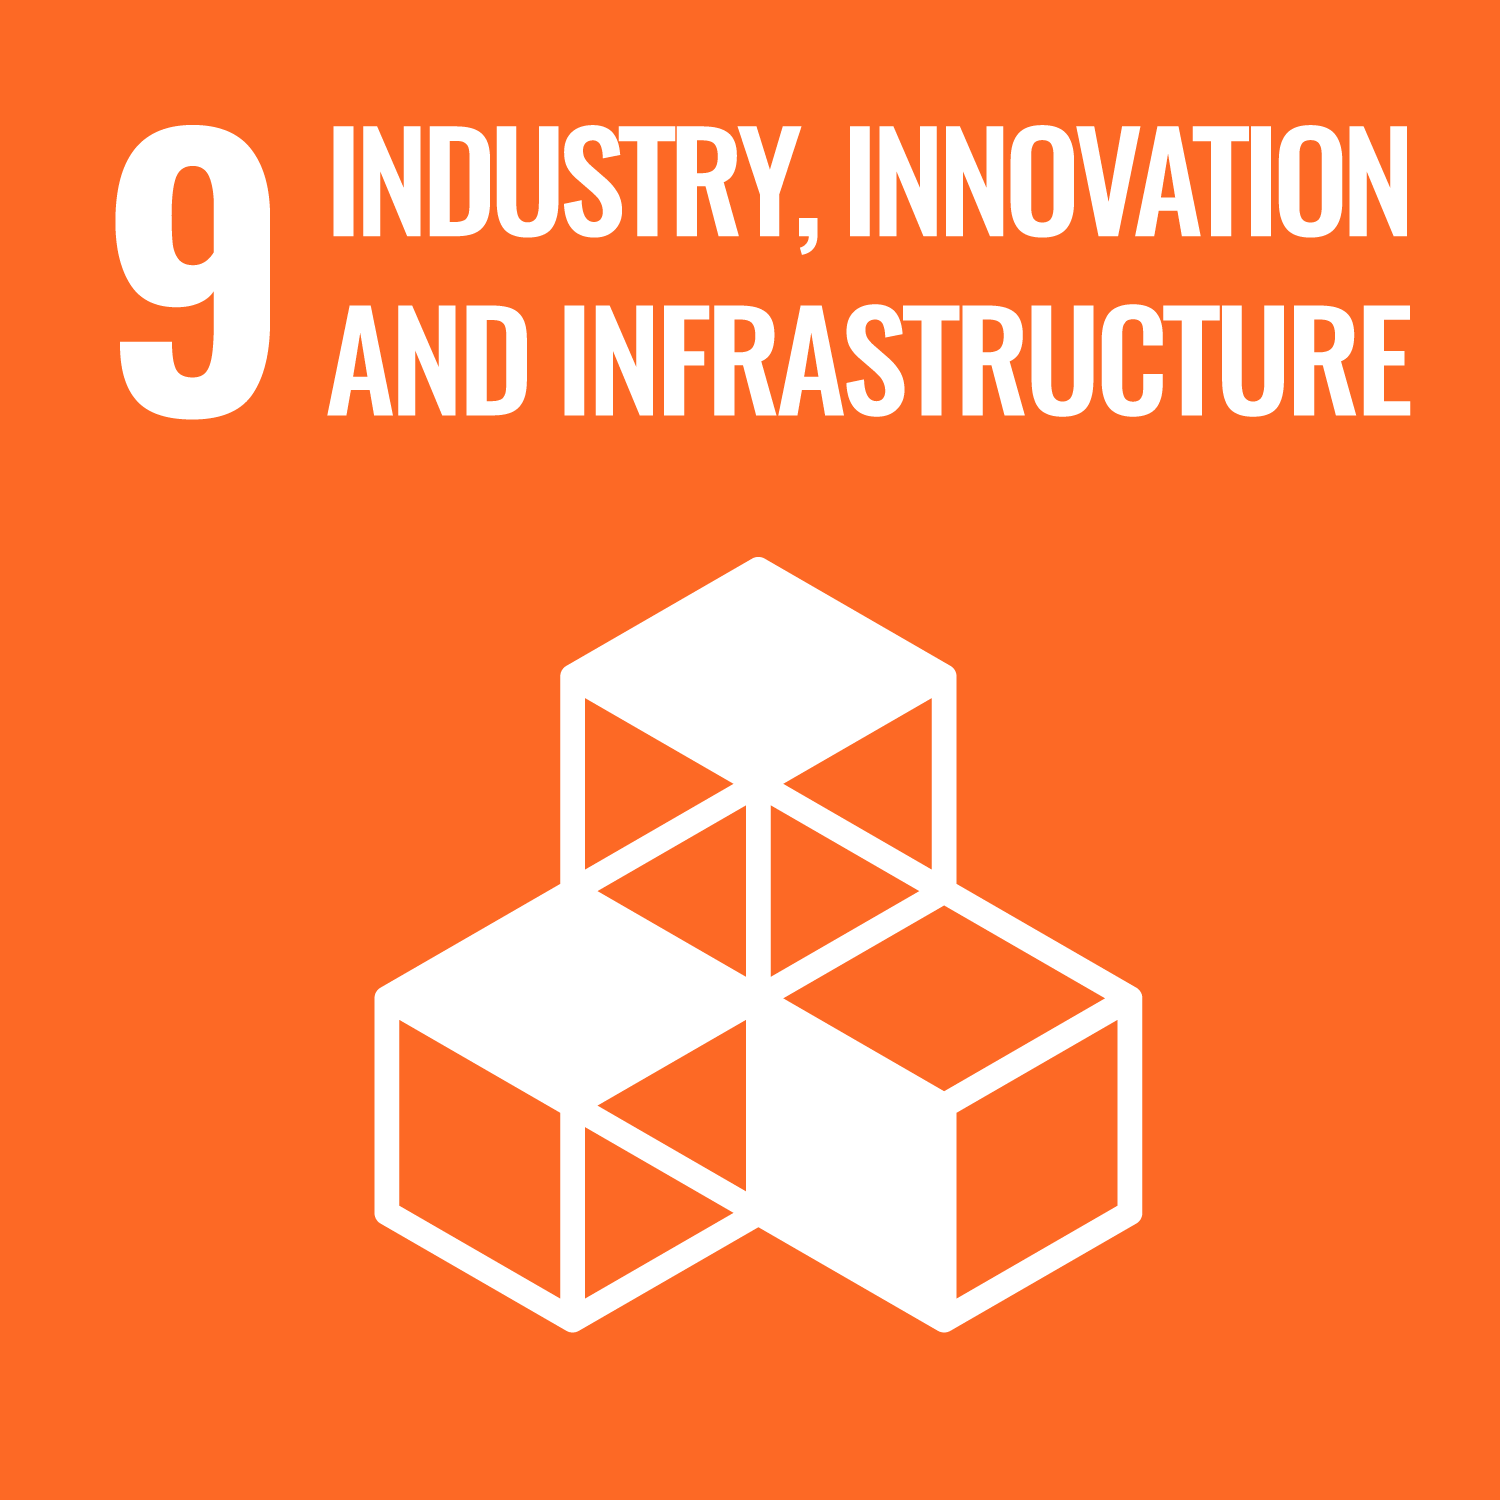 GOAL 9: INDUSTRY, INOVATION AND INFRASTRUCTURE